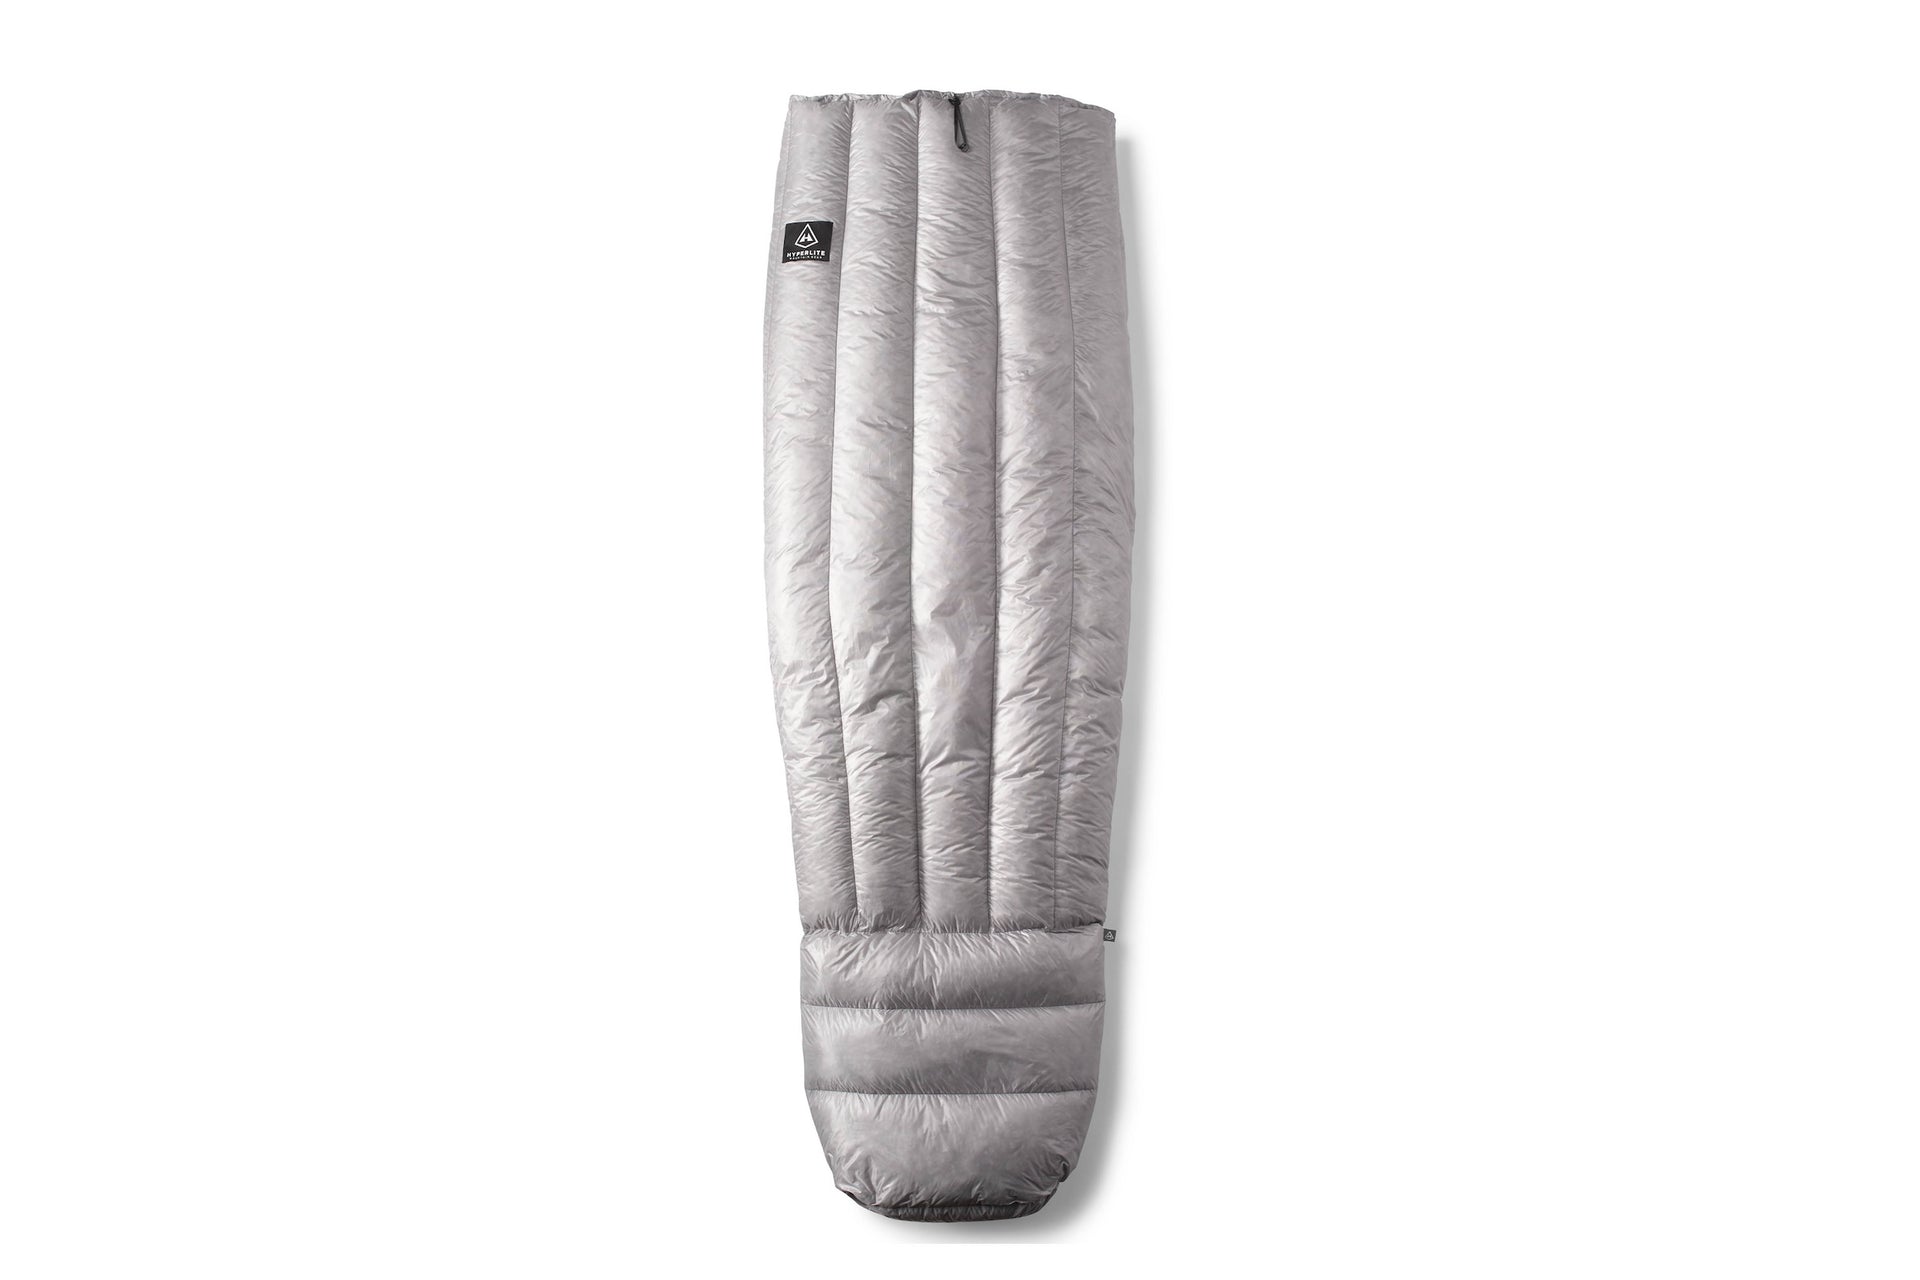 A sleeping bag on a white background.